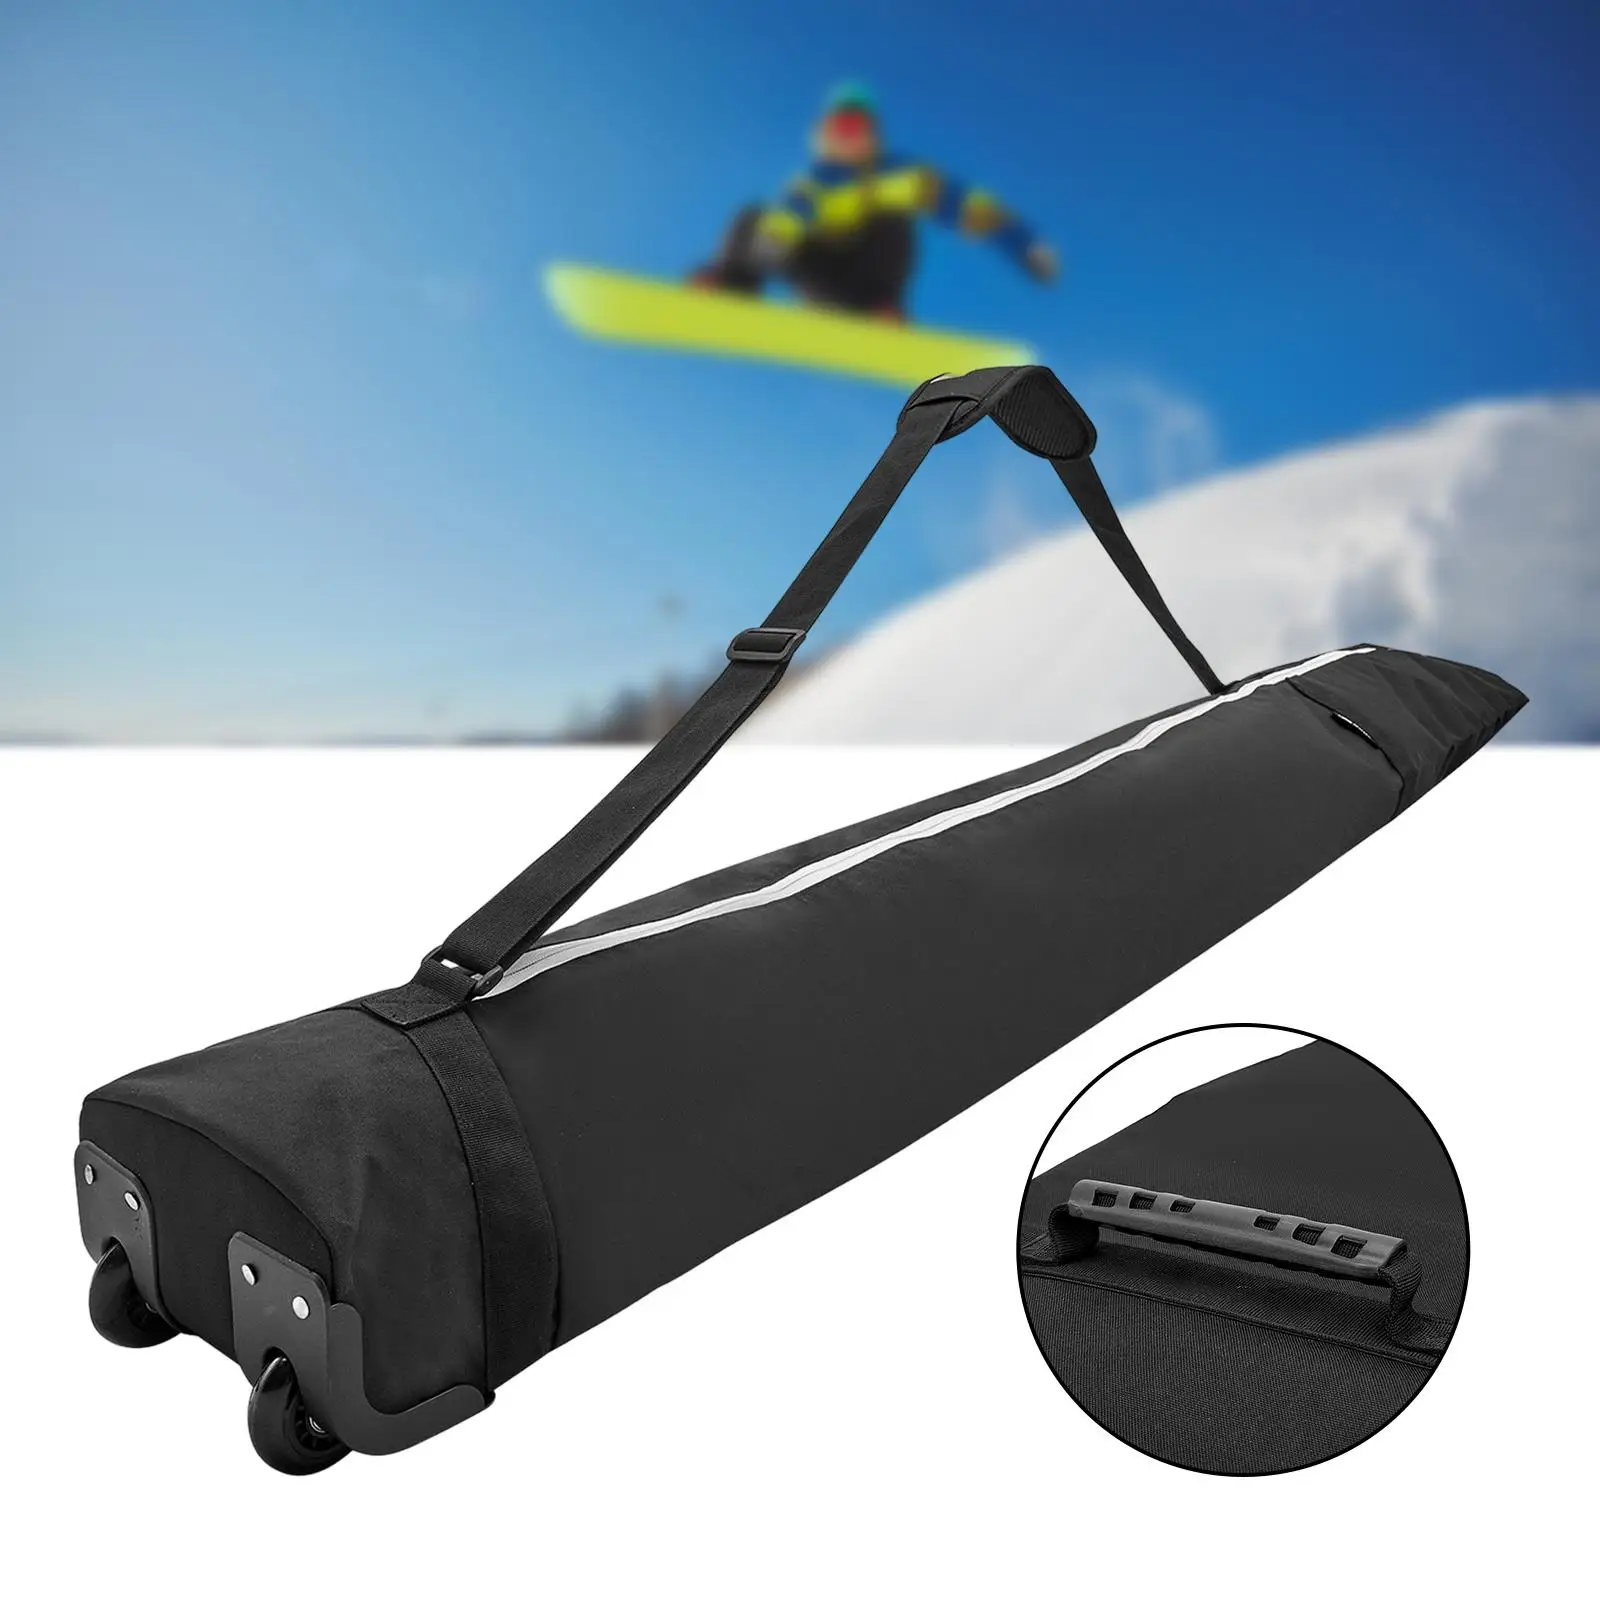  Expandable Wheeled Rollup Space Saver for Air Plane Travel Backpack Waterproof Protection Sleeve for Ski Men Women Gifts